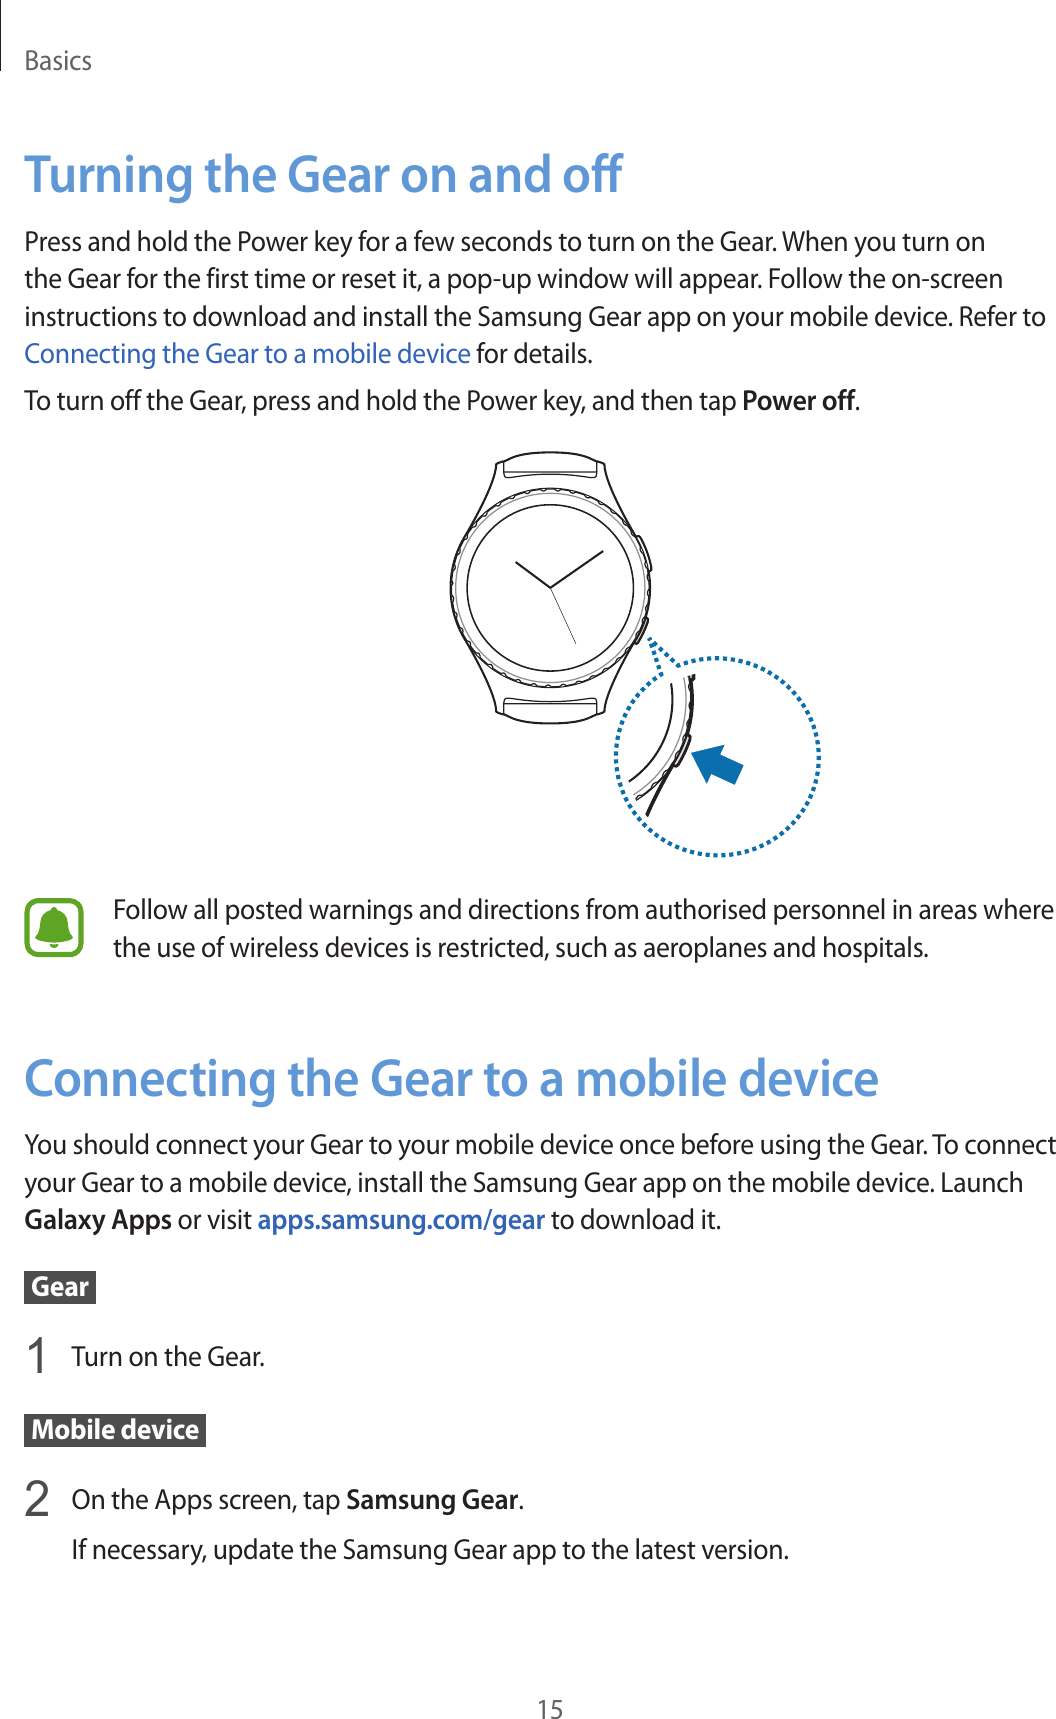 Basics15Turning the Gear on and offPress and hold the Power key for a few seconds to turn on the Gear. When you turn on the Gear for the first time or reset it, a pop-up window will appear. Follow the on-screen instructions to download and install the Samsung Gear app on your mobile device. Refer to Connecting the Gear to a mobile device for details.To turn off the Gear, press and hold the Power key, and then tap Power off.Follow all posted warnings and directions from authorised personnel in areas where the use of wireless devices is restricted, such as aeroplanes and hospitals.Connecting the Gear to a mobile deviceYou should connect your Gear to your mobile device once before using the Gear. To connect your Gear to a mobile device, install the Samsung Gear app on the mobile device. Launch Galaxy Apps or visit apps.samsung.com/gear to download it. Gear 1  Turn on the Gear. Mobile device 2  On the Apps screen, tap Samsung Gear.If necessary, update the Samsung Gear app to the latest version.